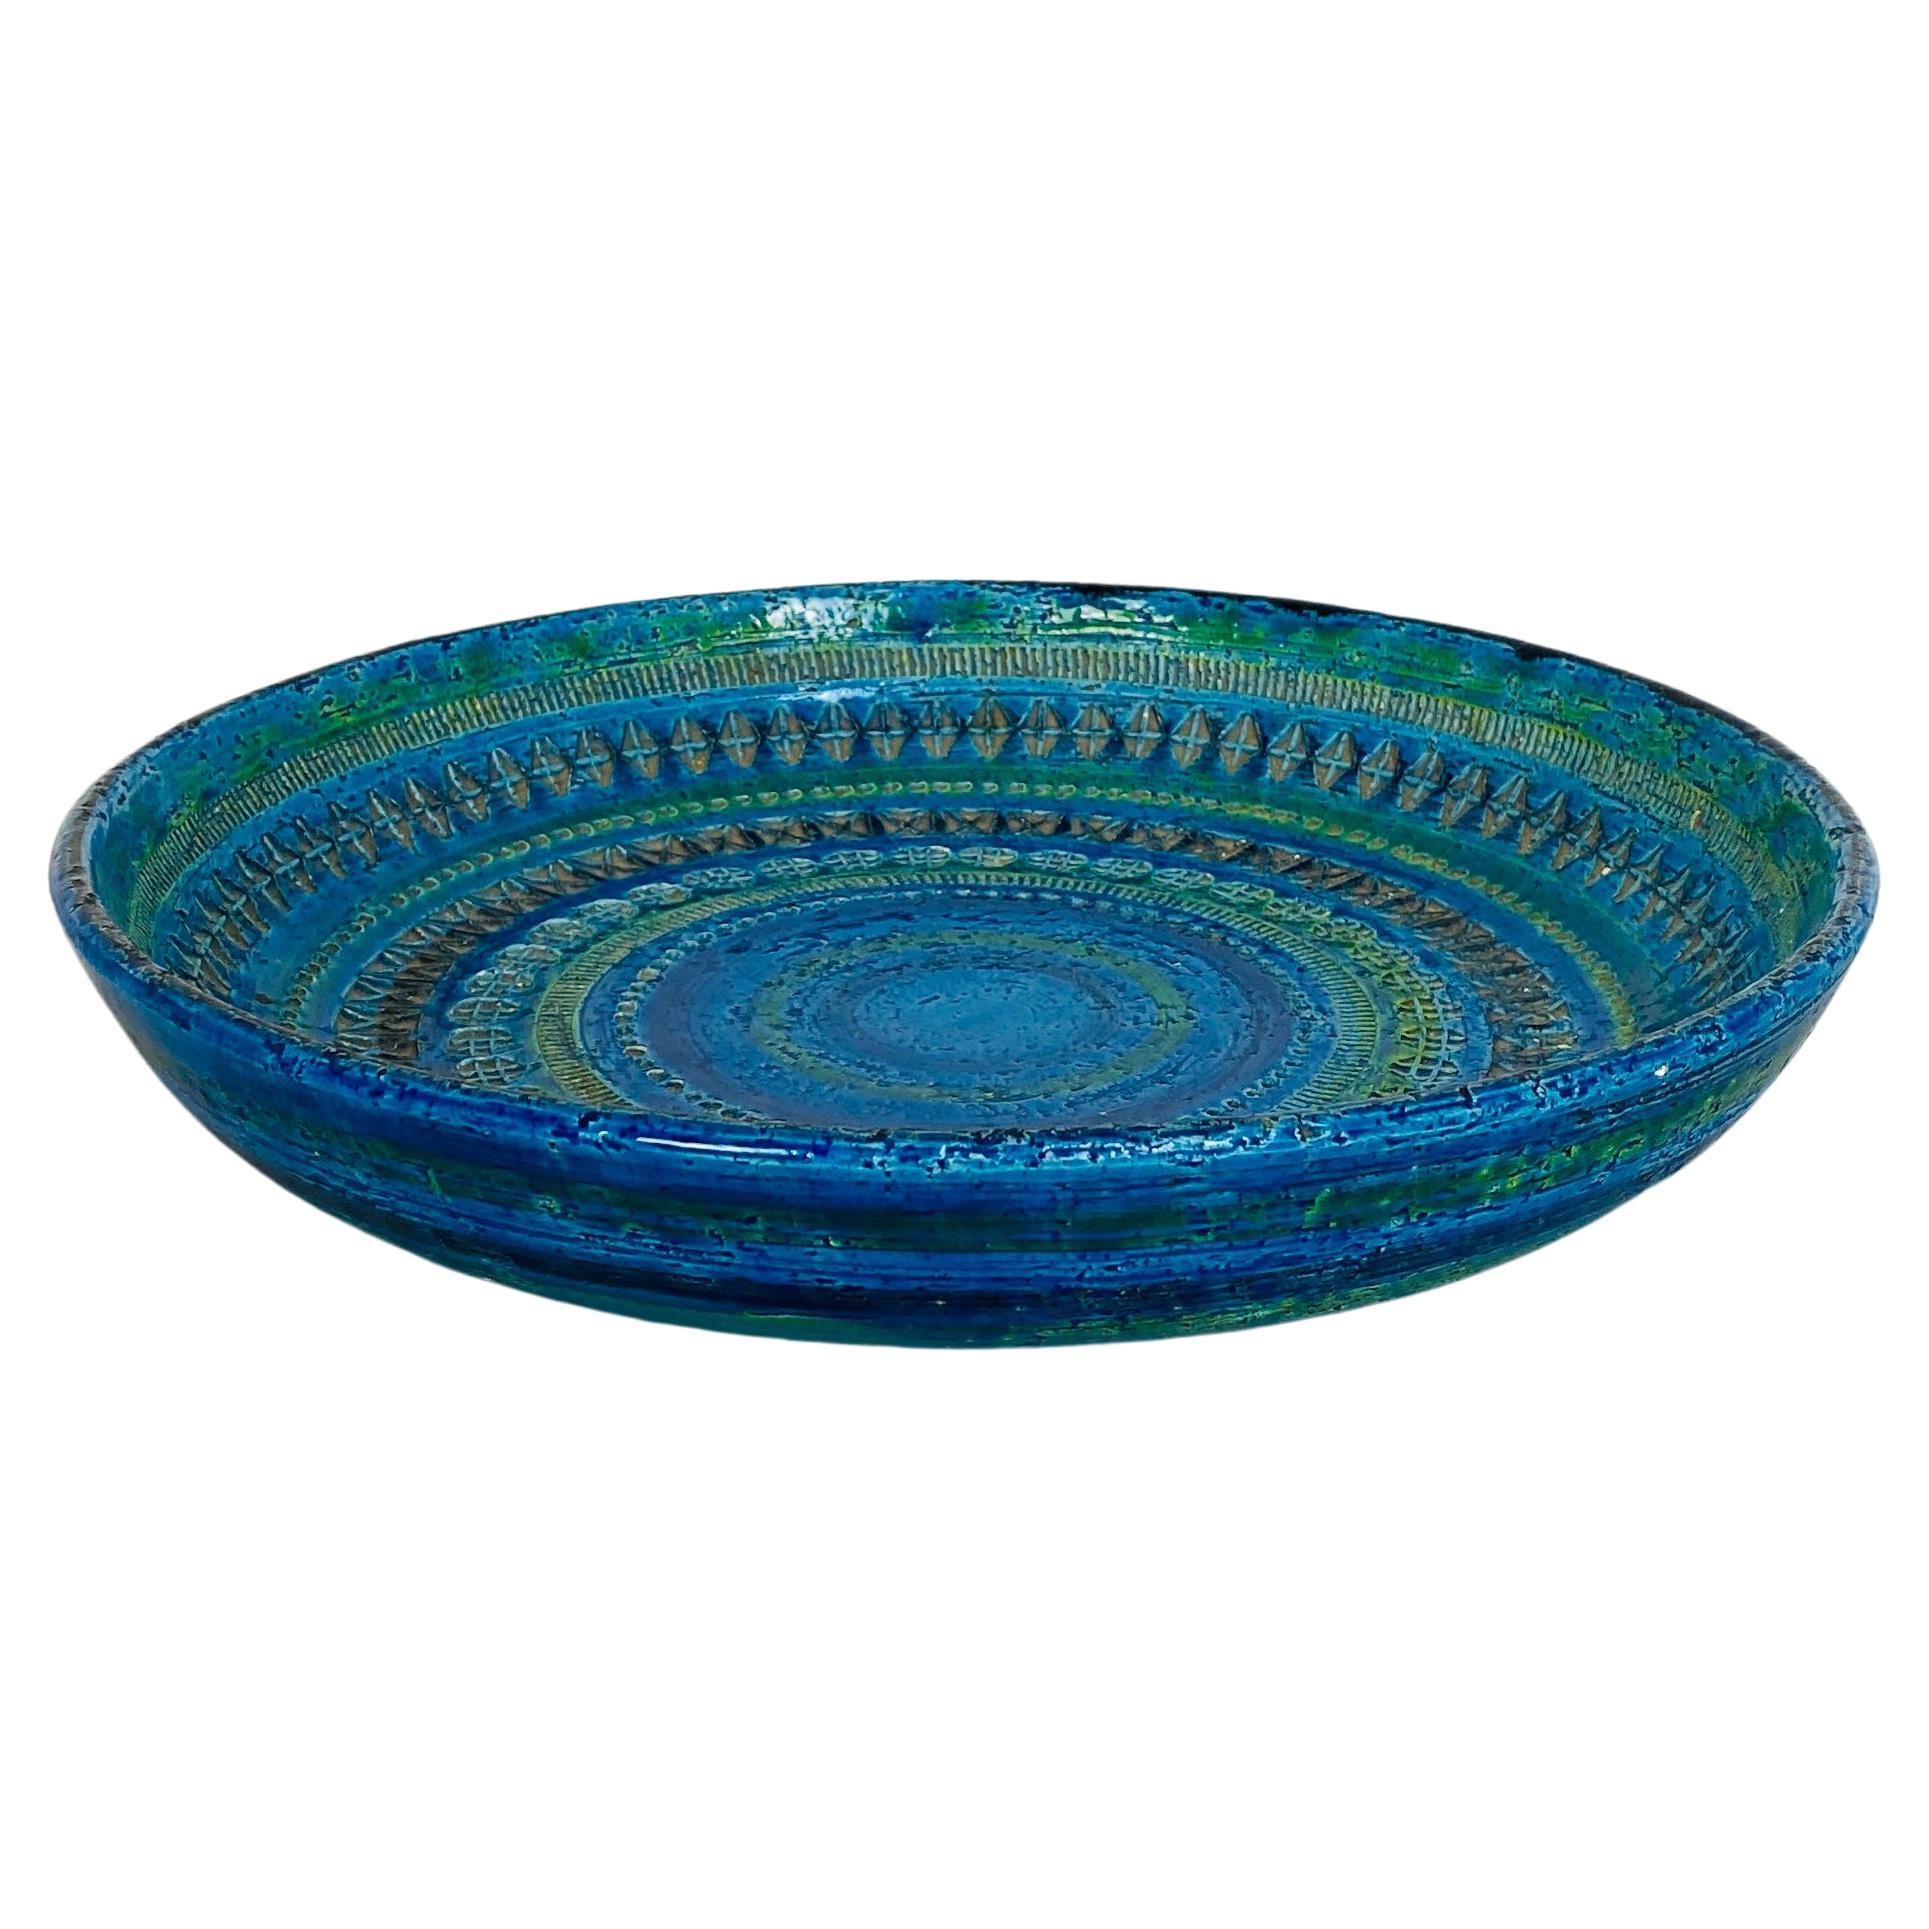 Italian Mid-Century Modern Blue Decorated Plate by Bitossi, 1970s